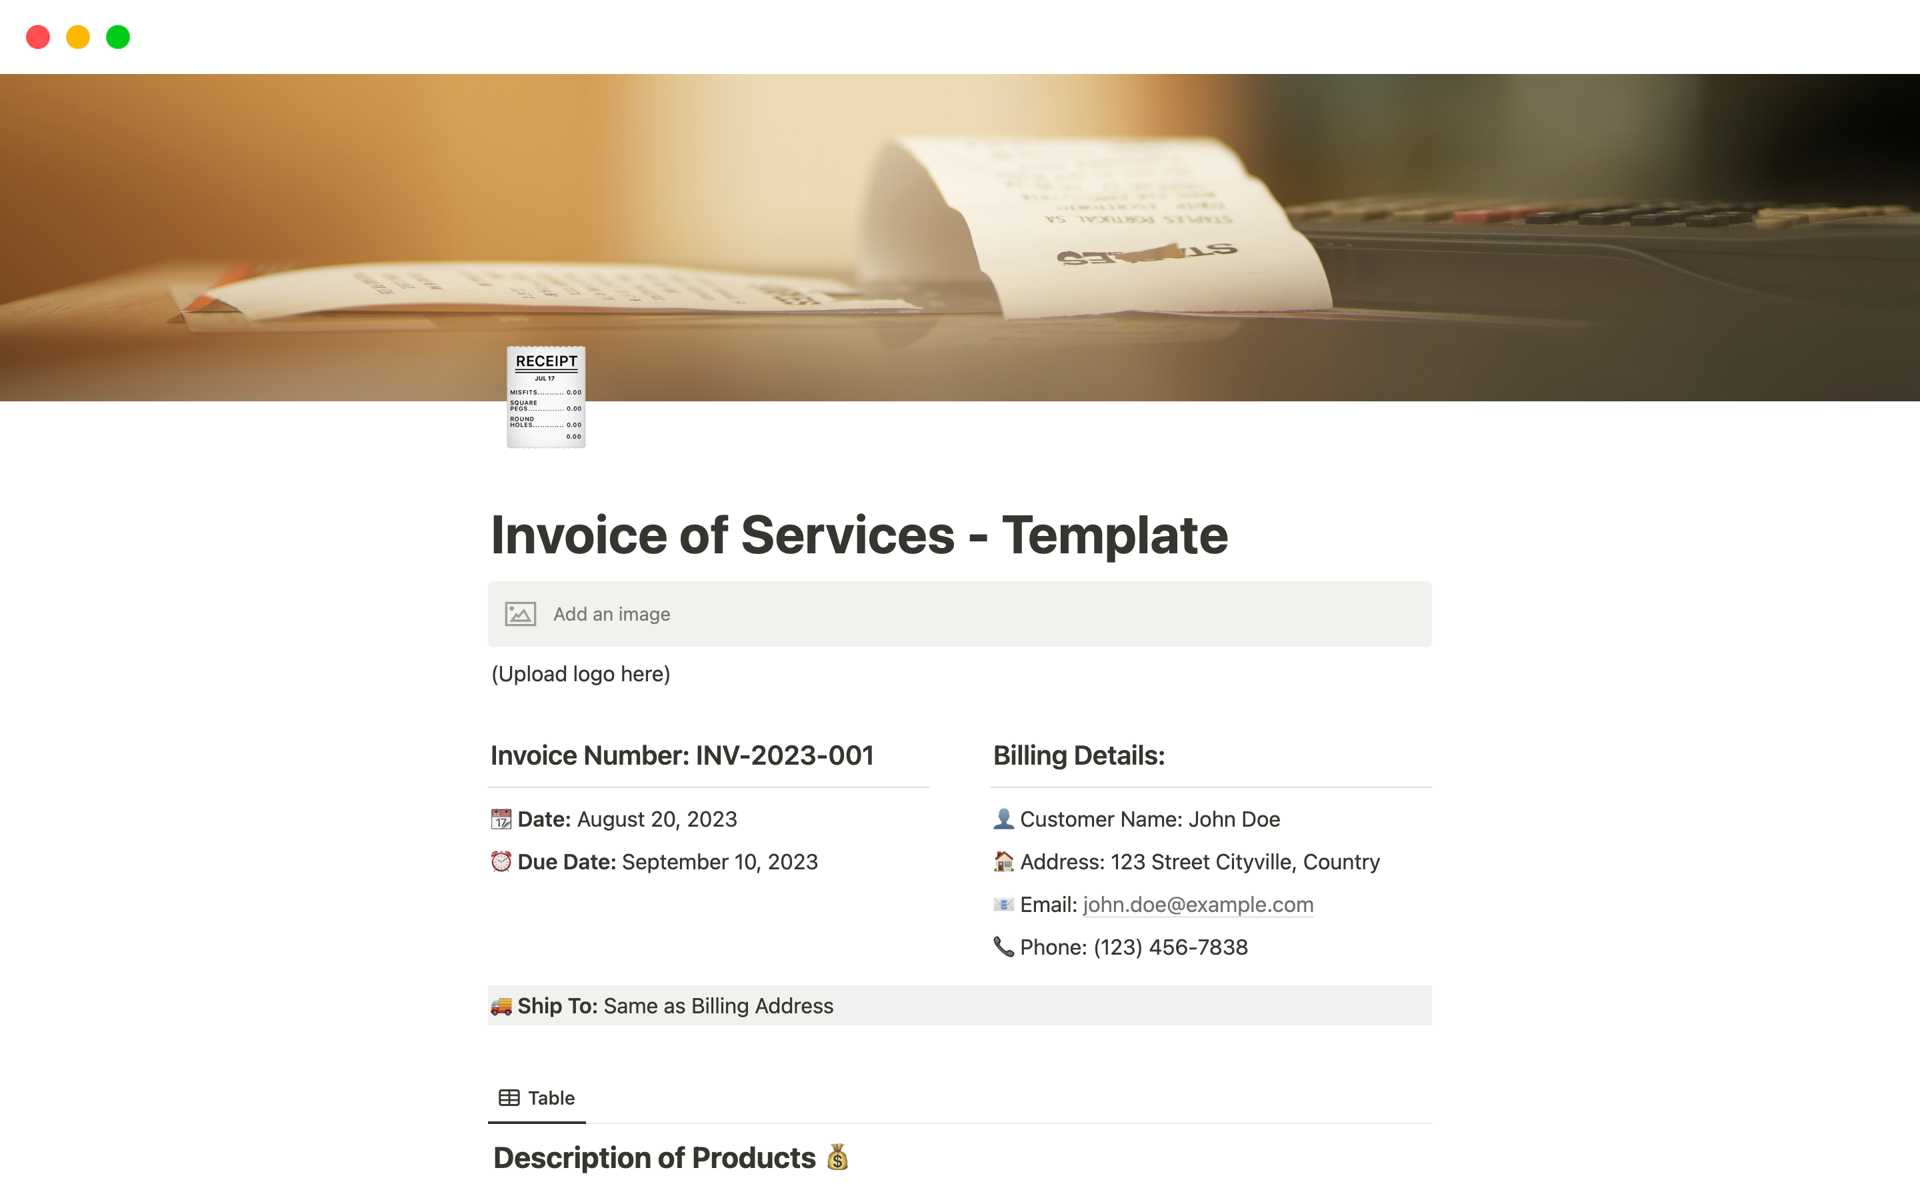 A template preview for Invoice of Services